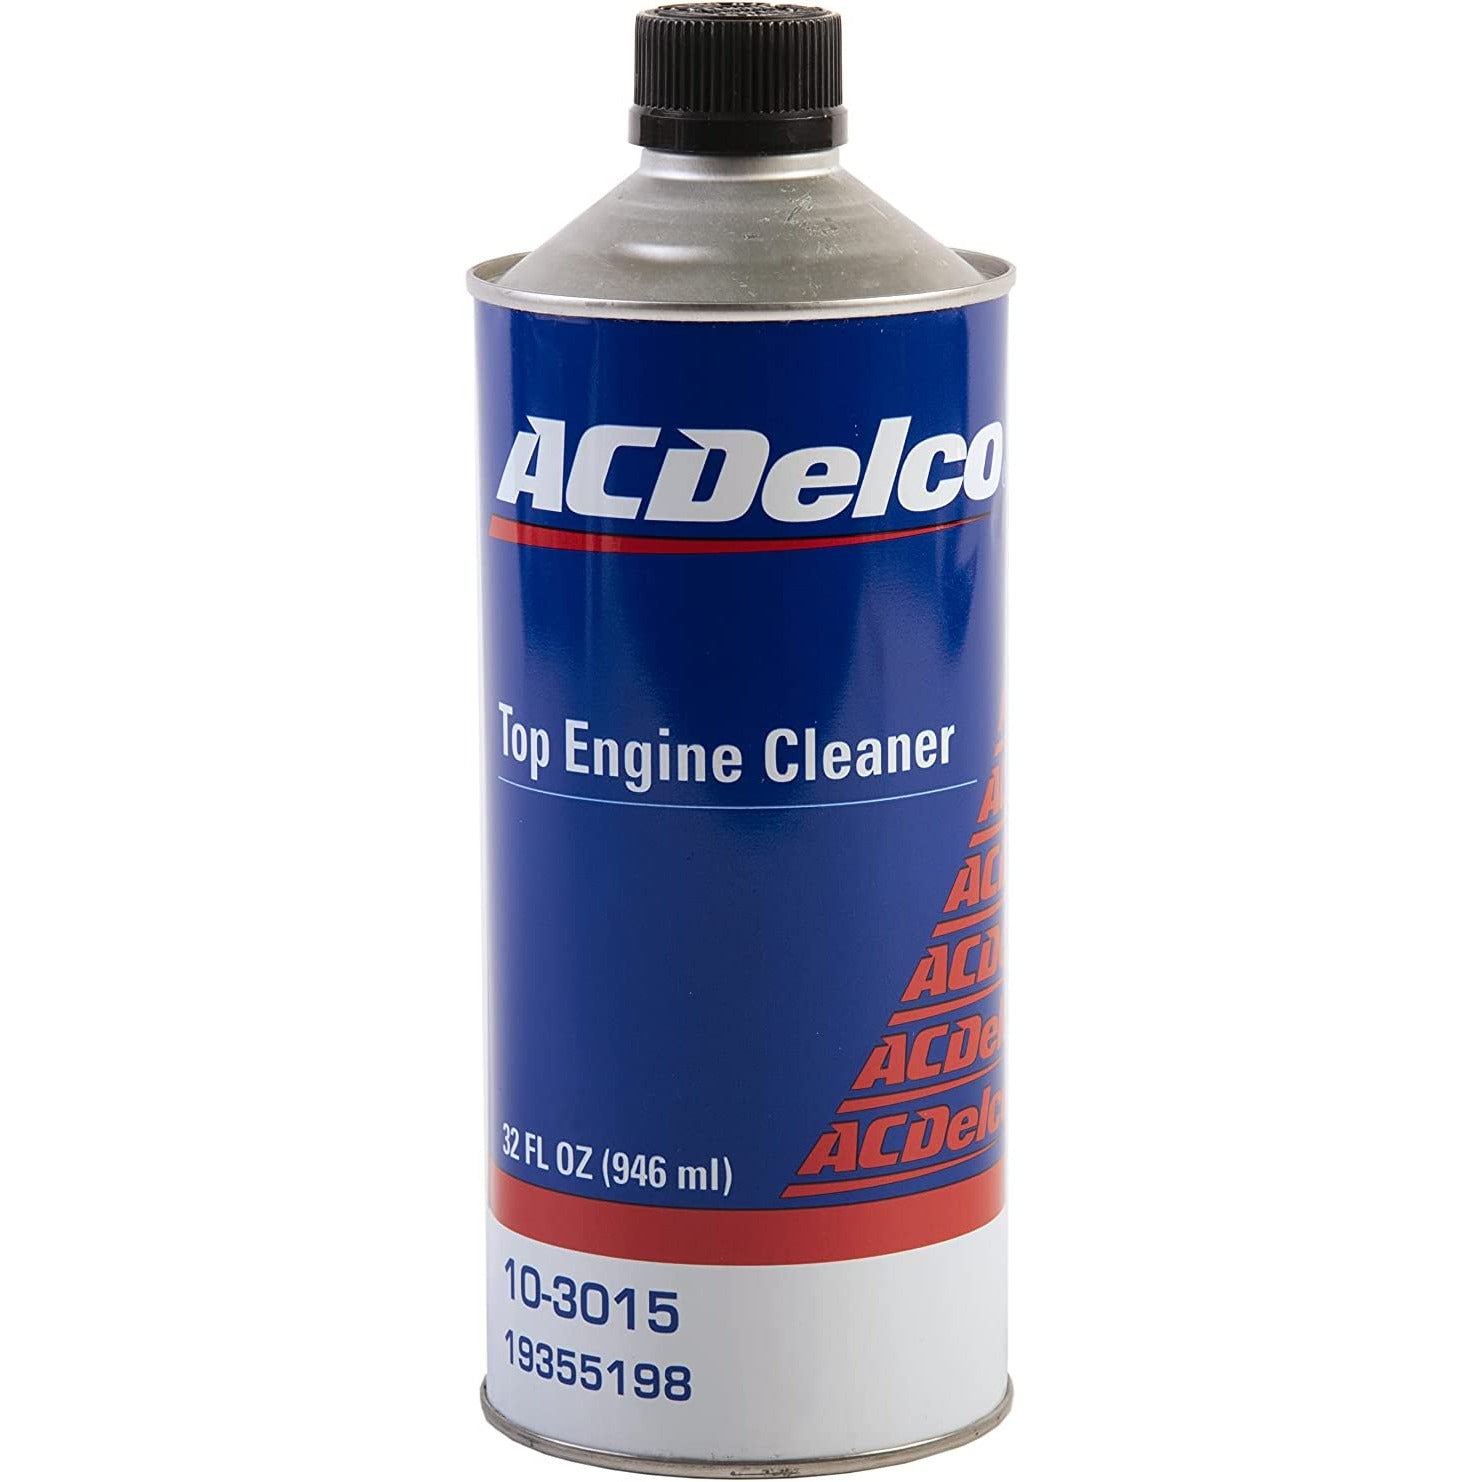 XAD 10-3015 Delco Top Engine Cleaner (32 oz)